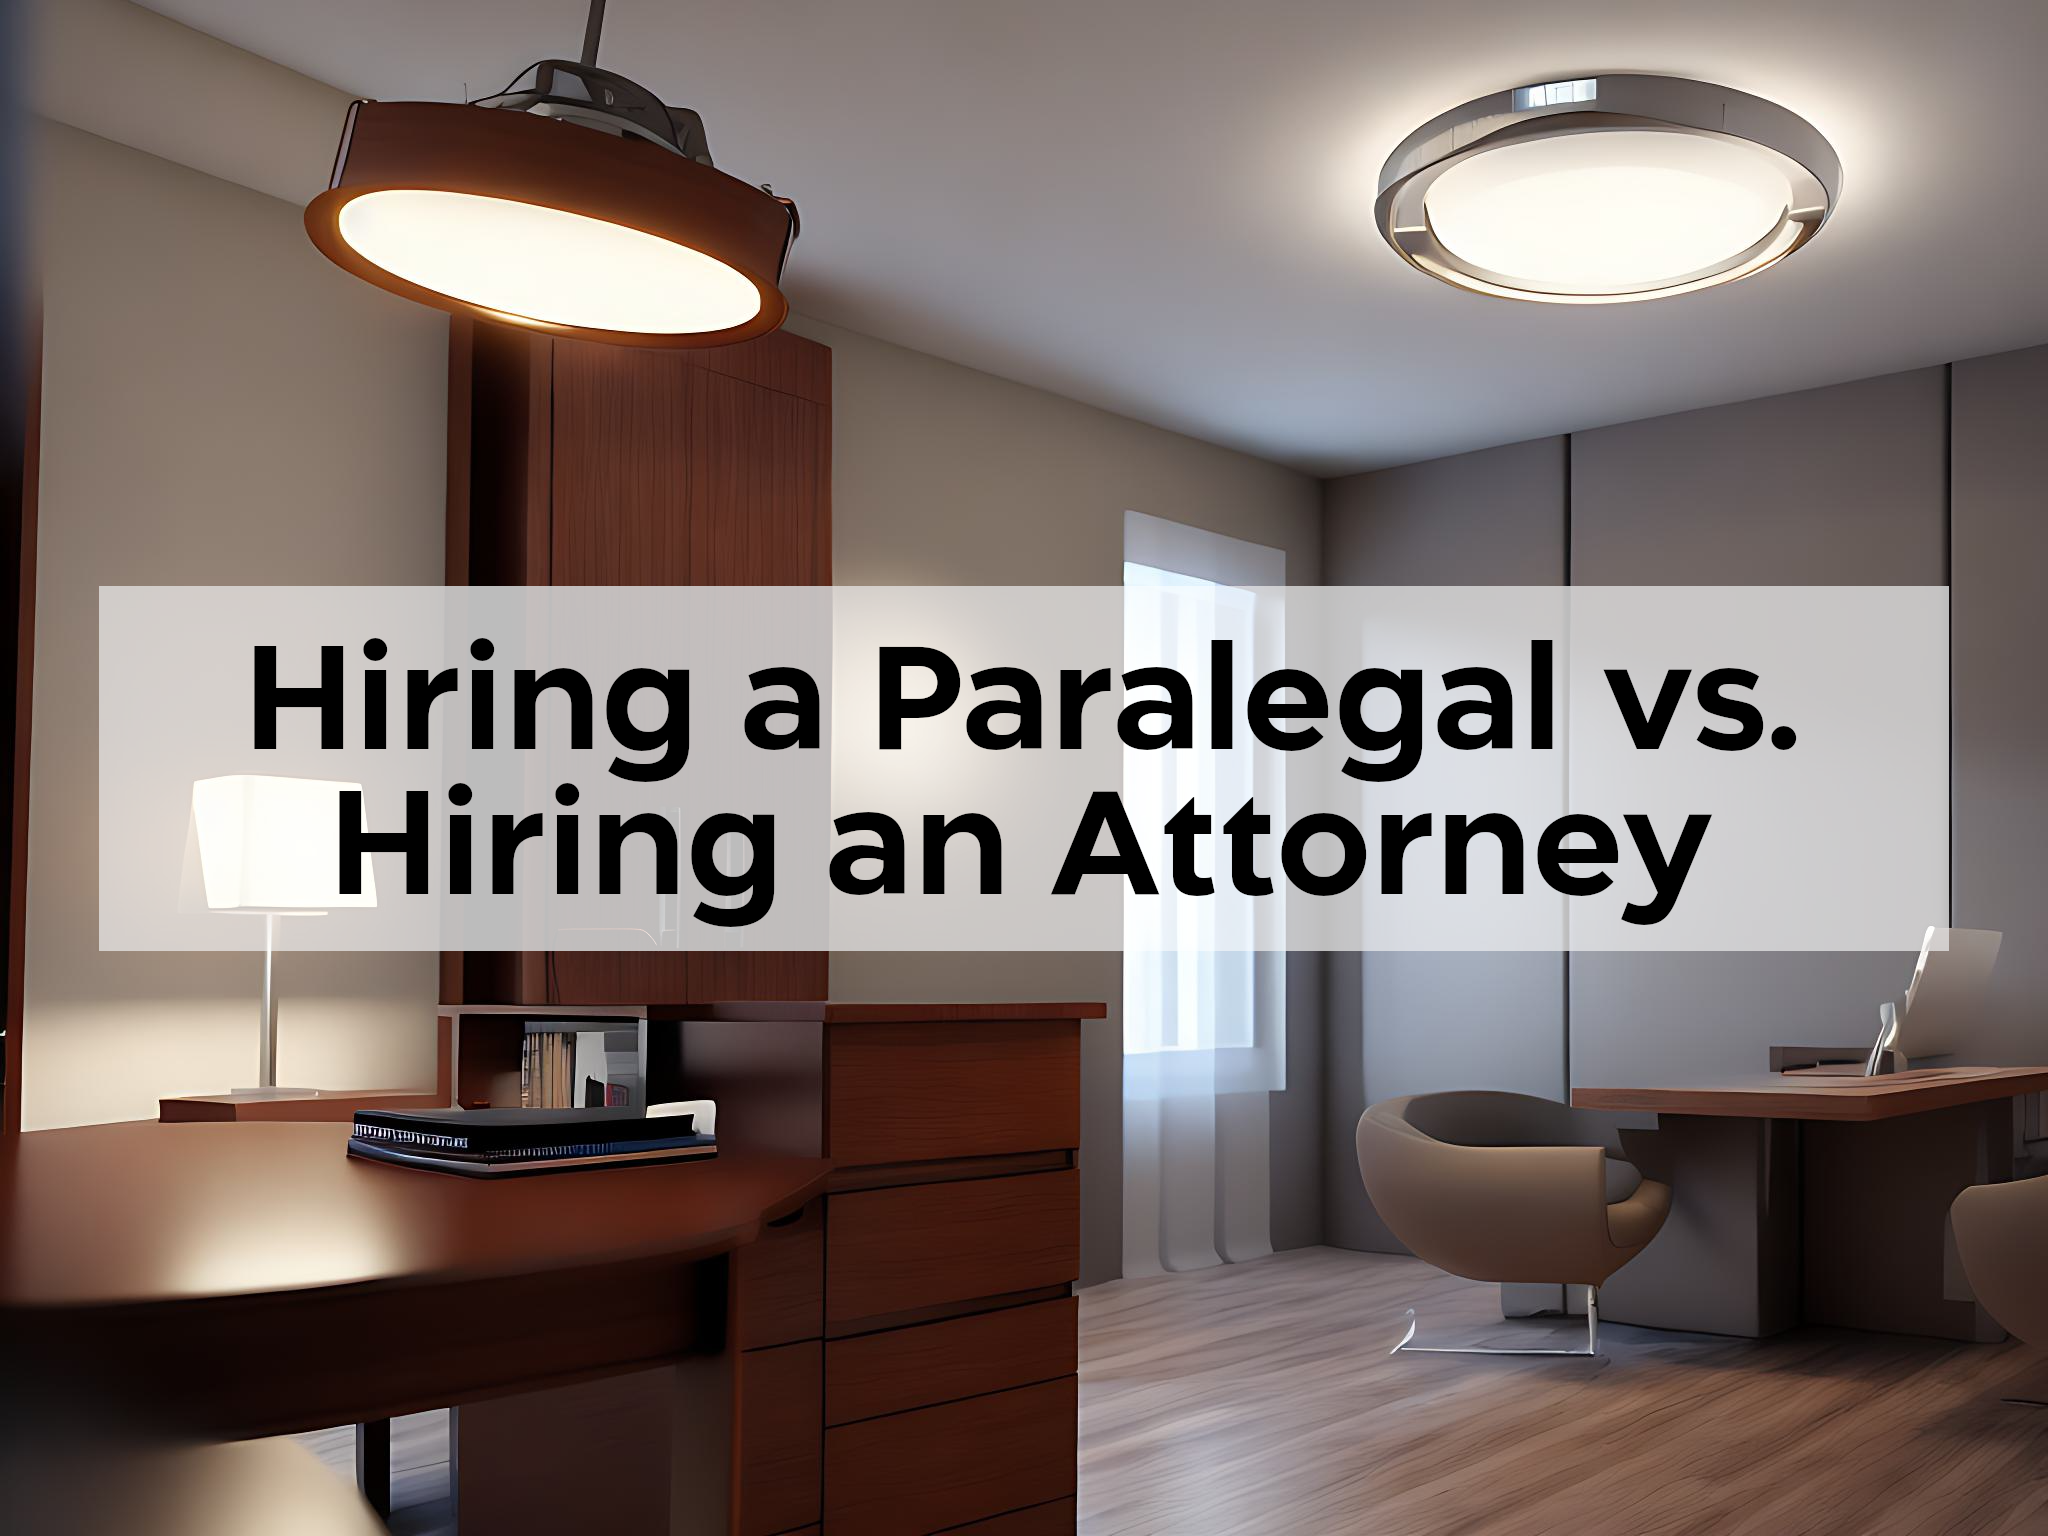 You are currently viewing Hiring a Paralegal vs. Hiring an Attorney